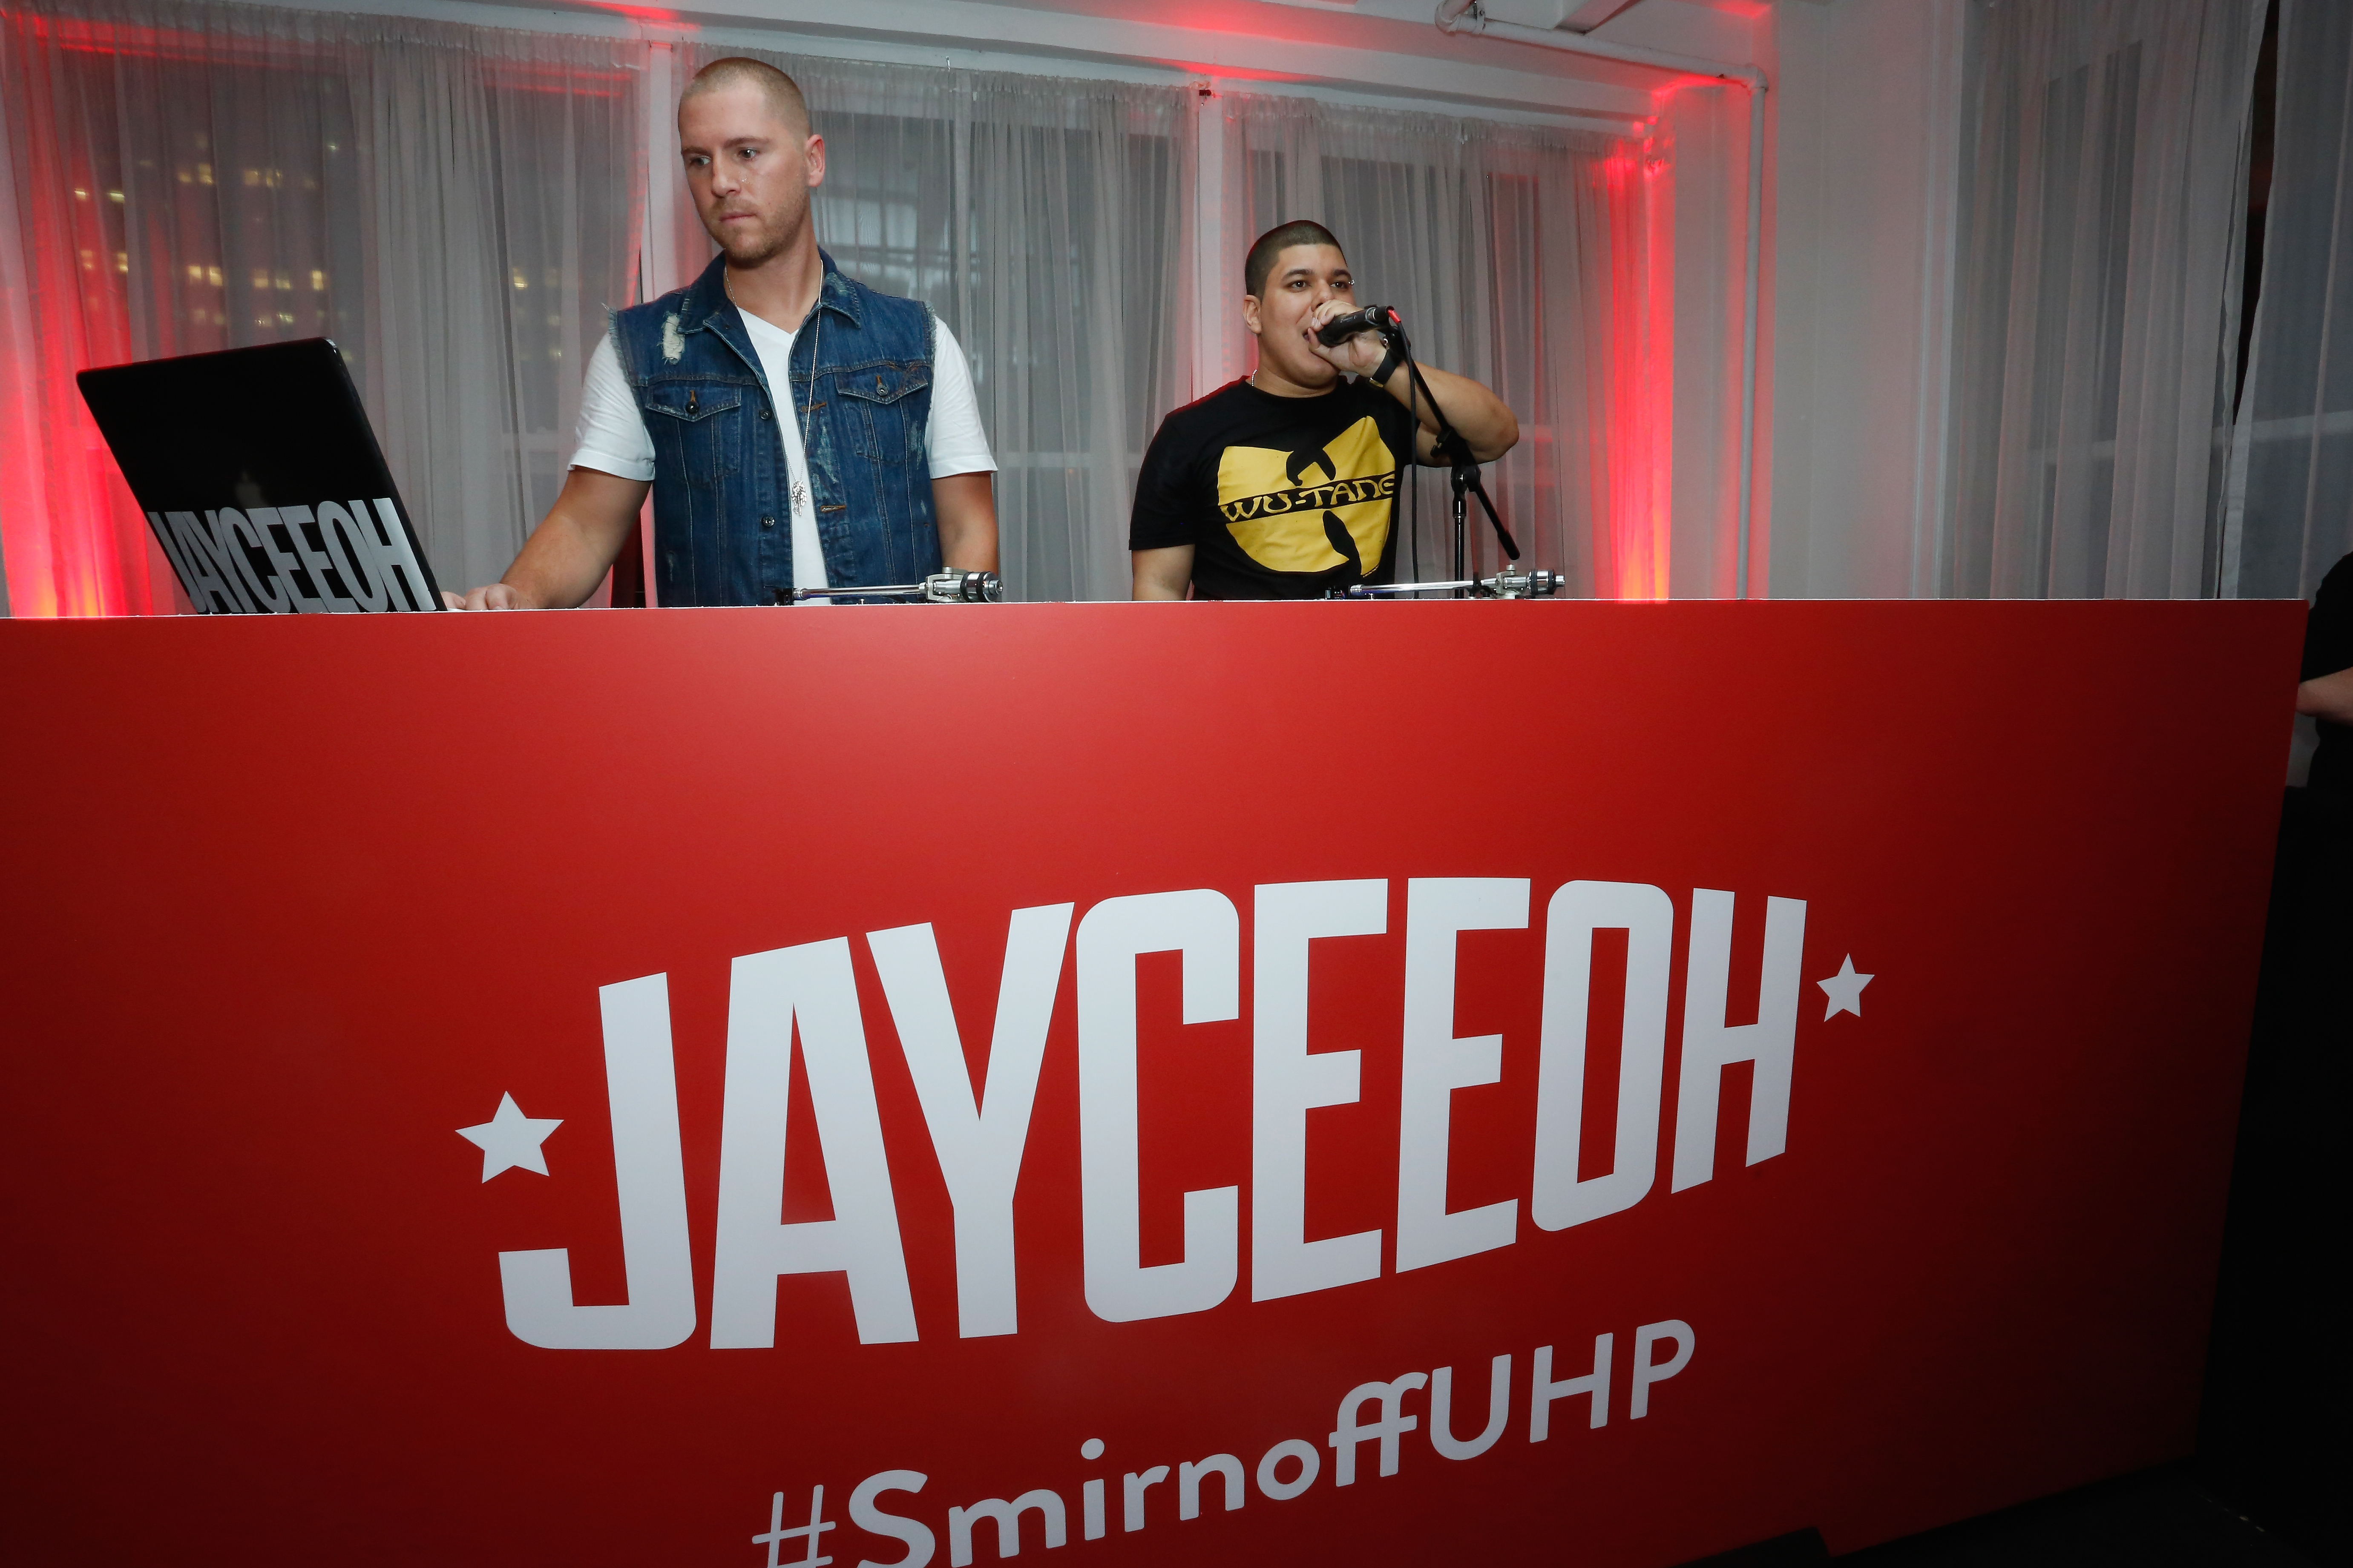 SMIRNOFF Vodka And Spotify Throw One Lucky Winner The "Ultimate House Party" With Special Performances By Kelis And JayCeeOh In New York City On June 12